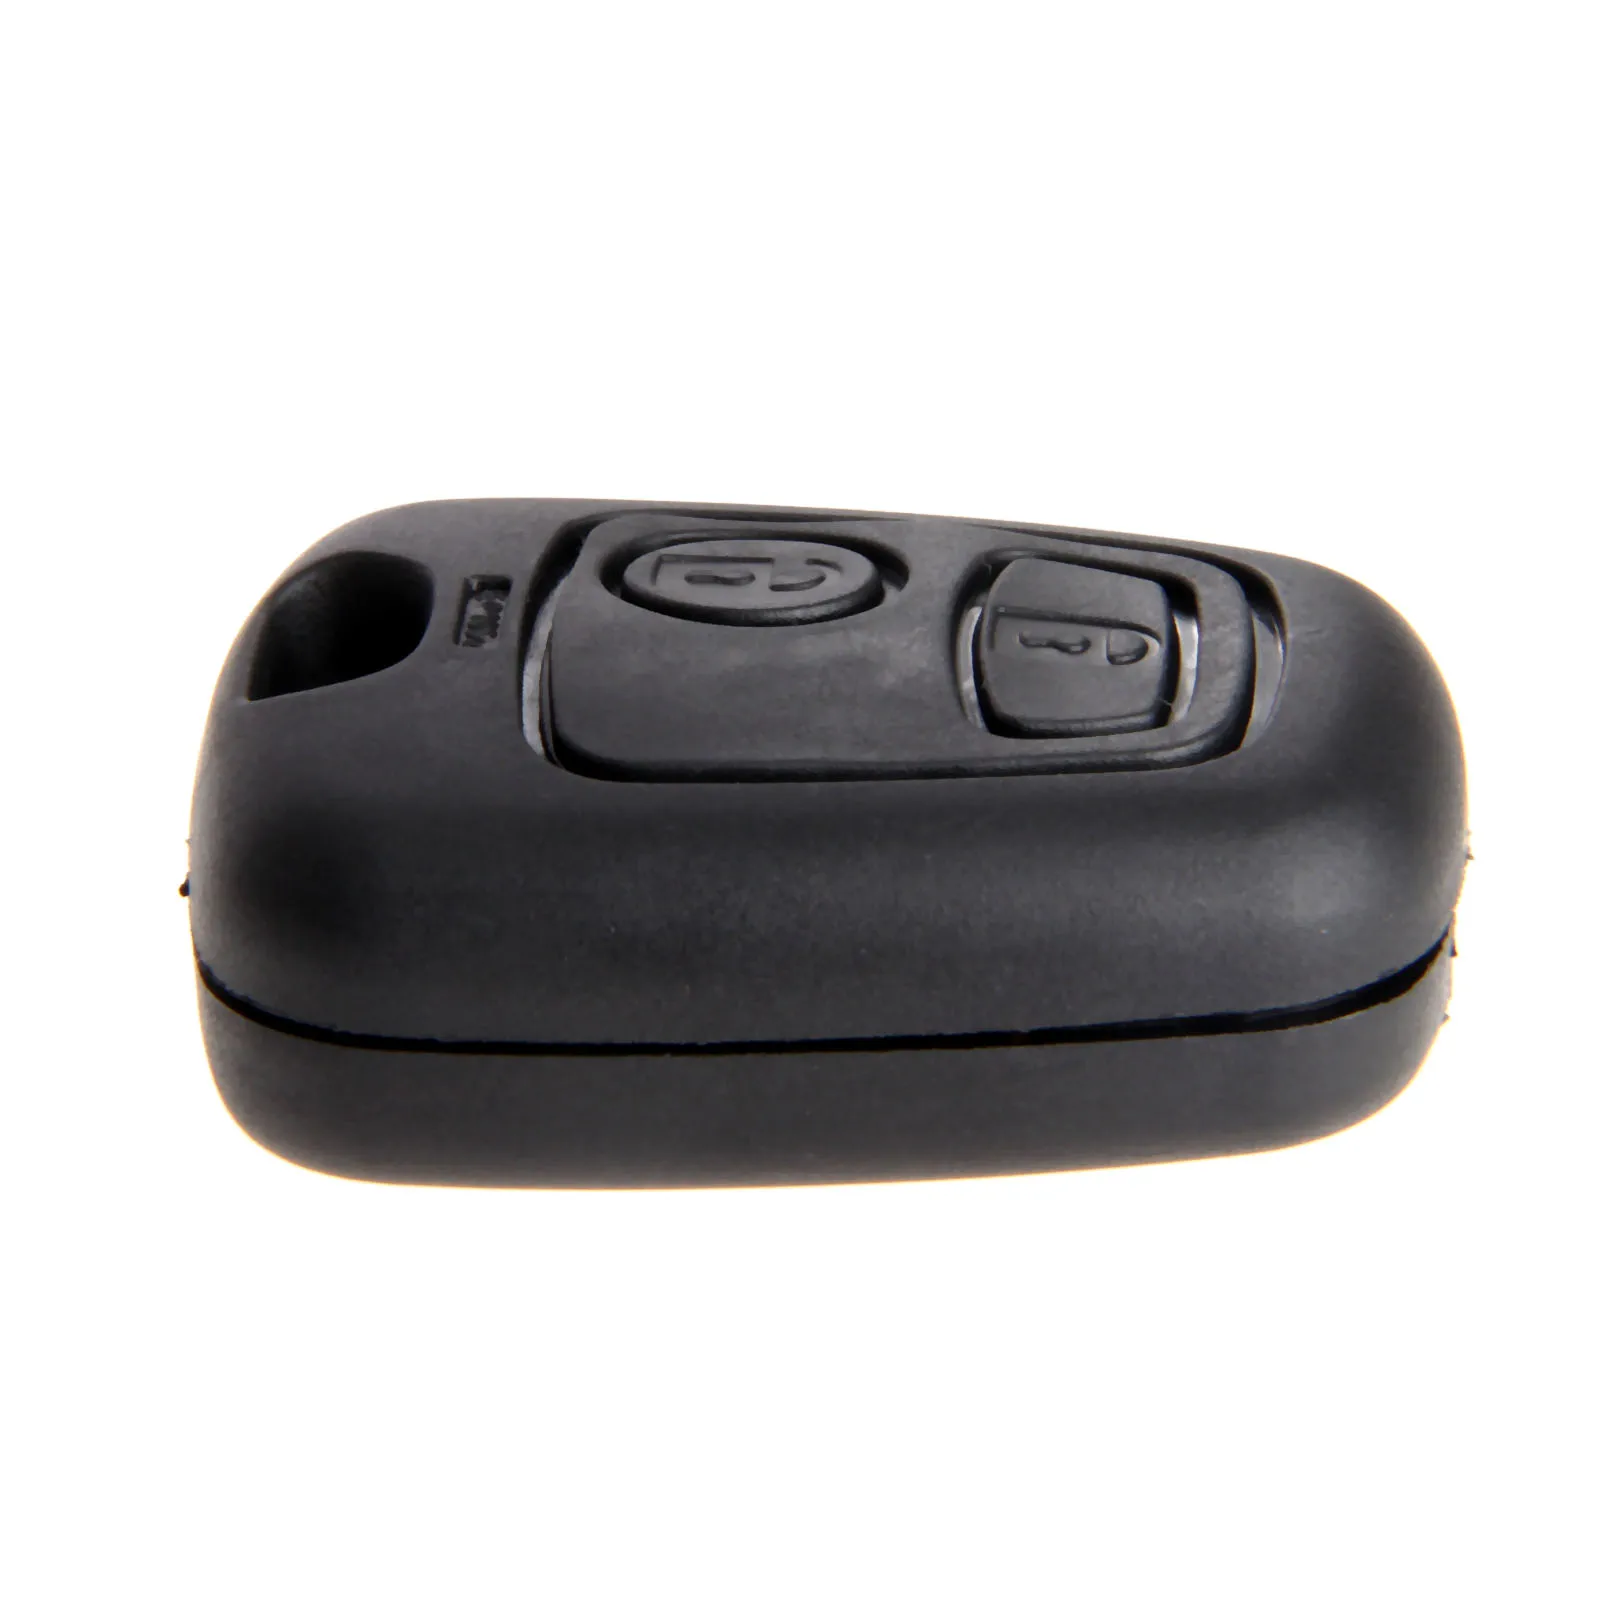 2 BUTTON REMOTE KEY FOB CASE FOR PEUGEOT 106 107 206 207 307 406 407 CBD102 CPUK